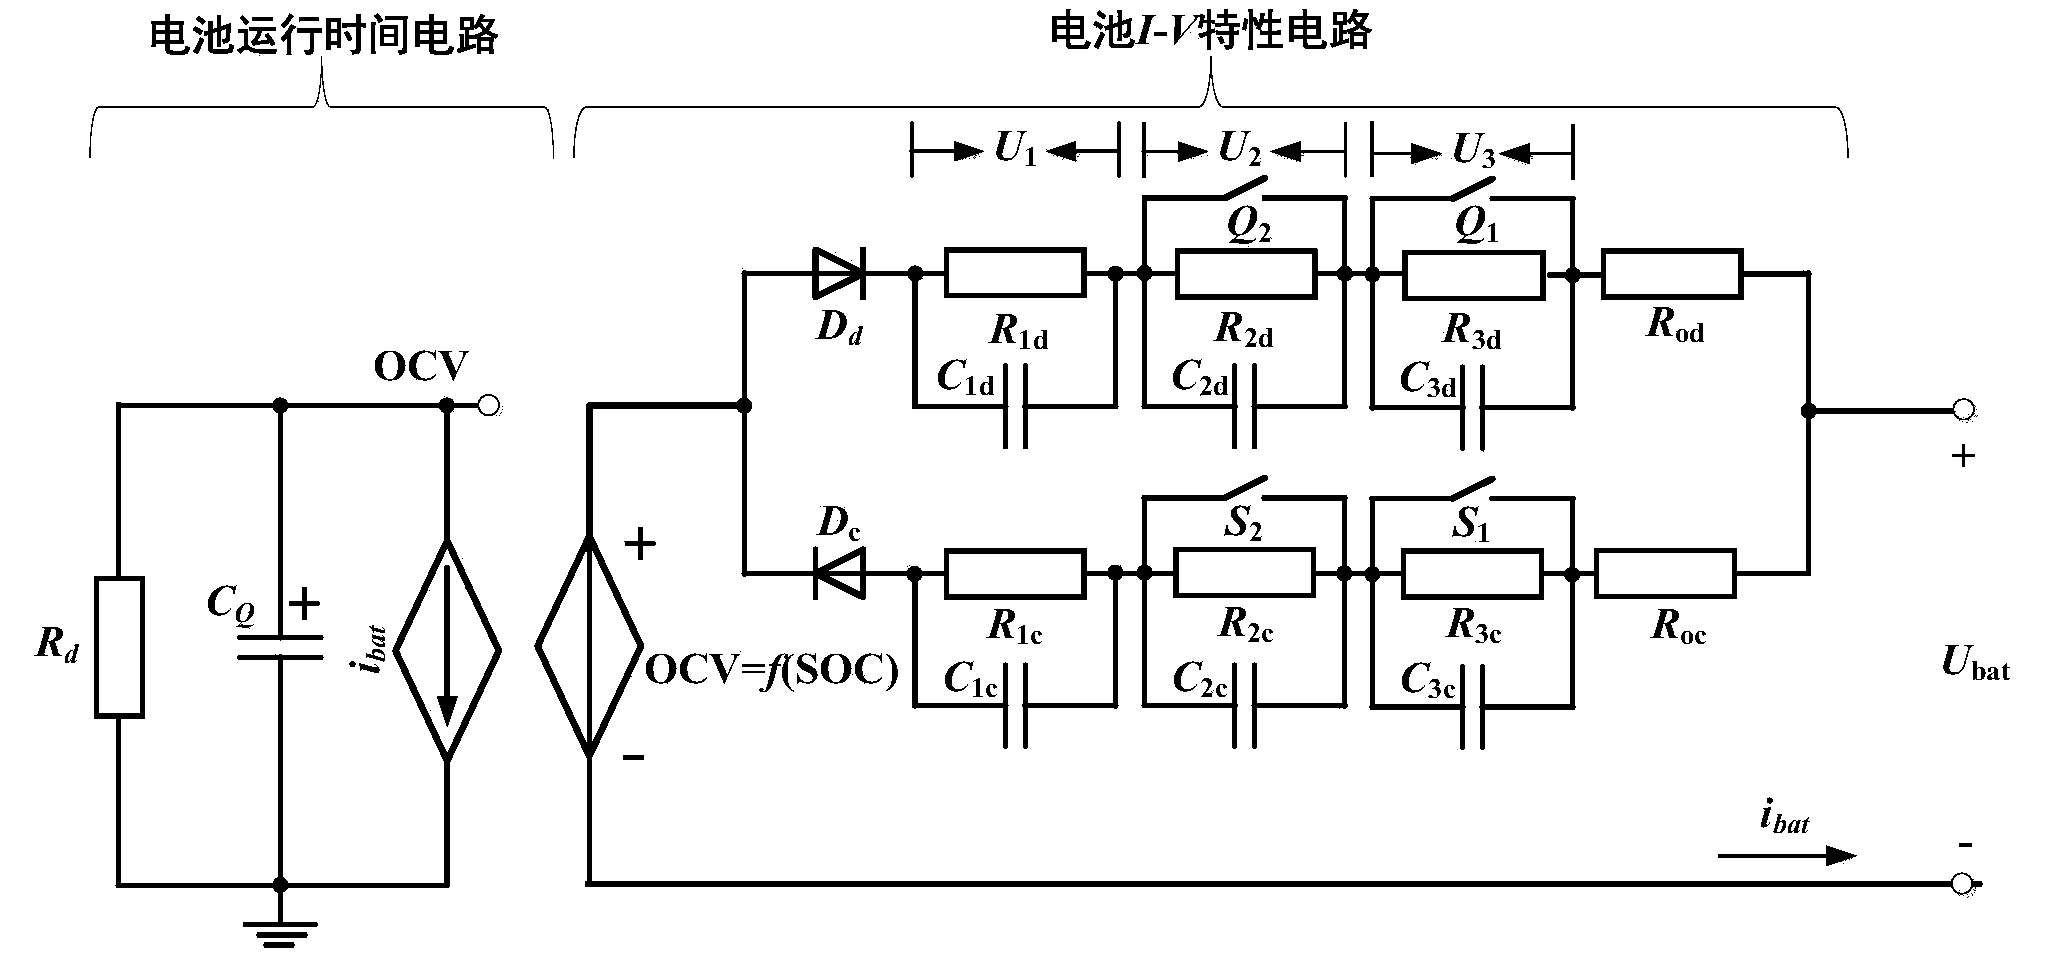 Variable tap-length RC equivalent circuit model and realization method based on AIC